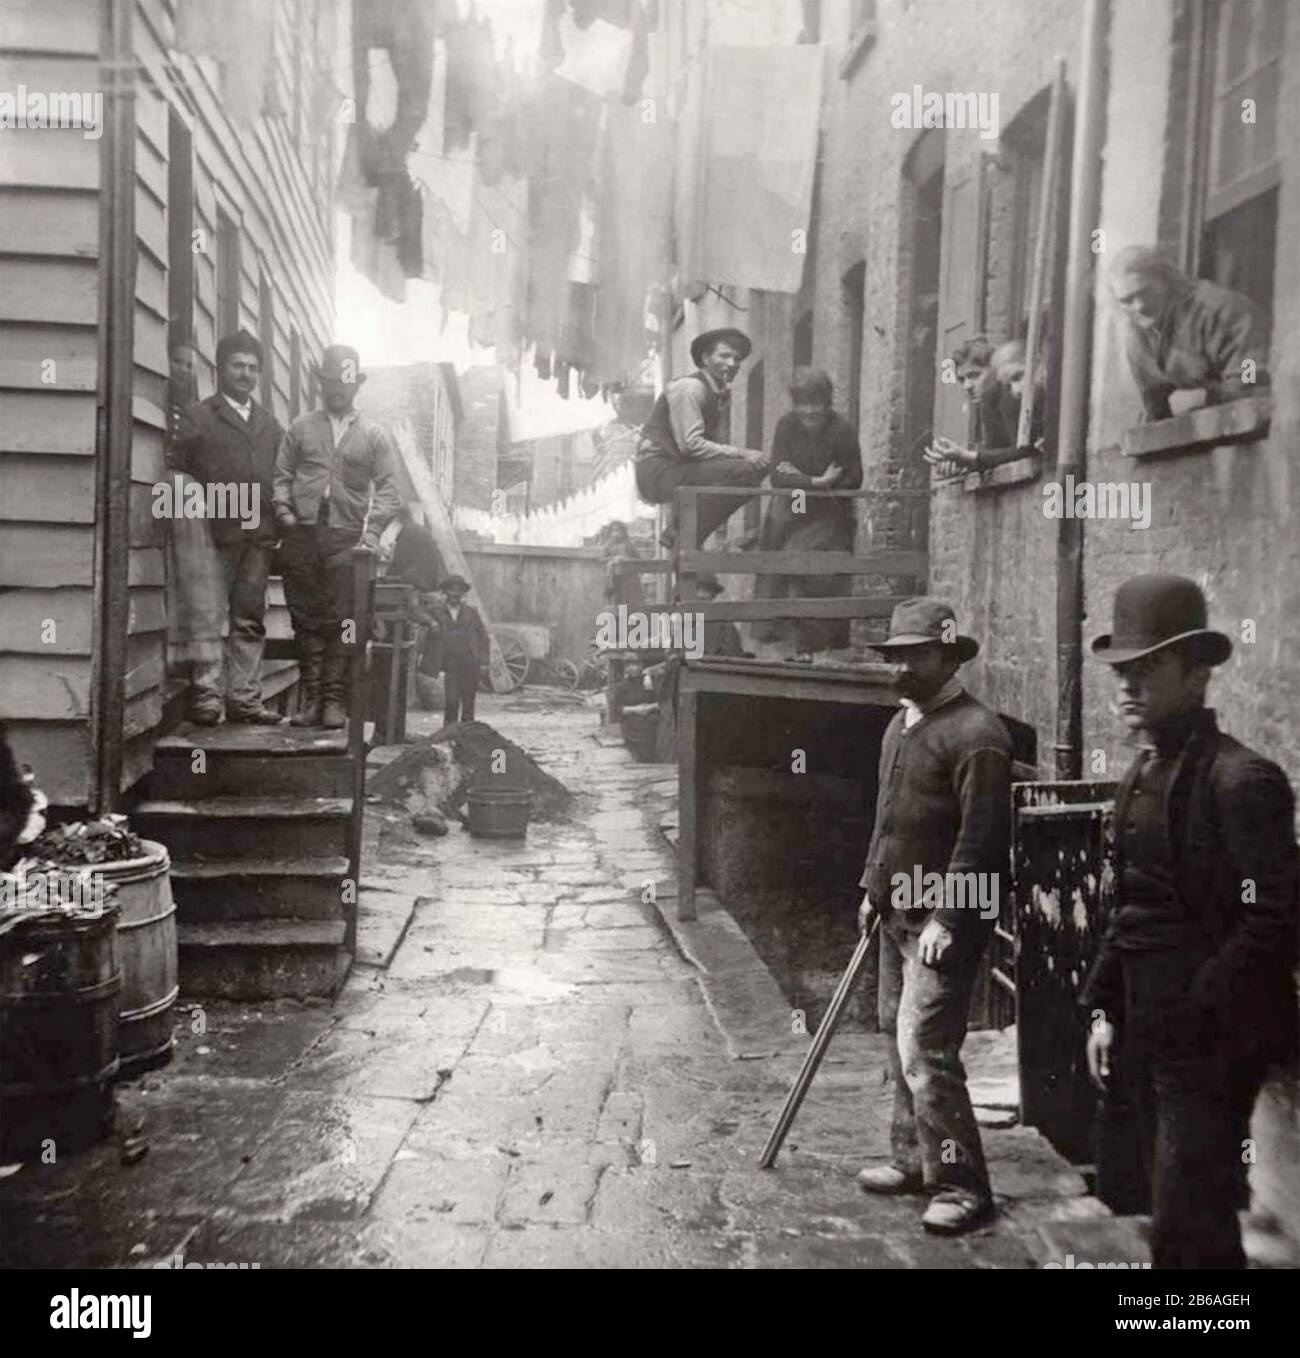 JACOB RIIS (1849-1914) Danish-American journalist, photographer and social reformer. His photo 'Bandit's Roost' at 59 1/2 Mulberrry Street,New York shows criminal gangs in one of the city's most dangerous areas. Stock Photo